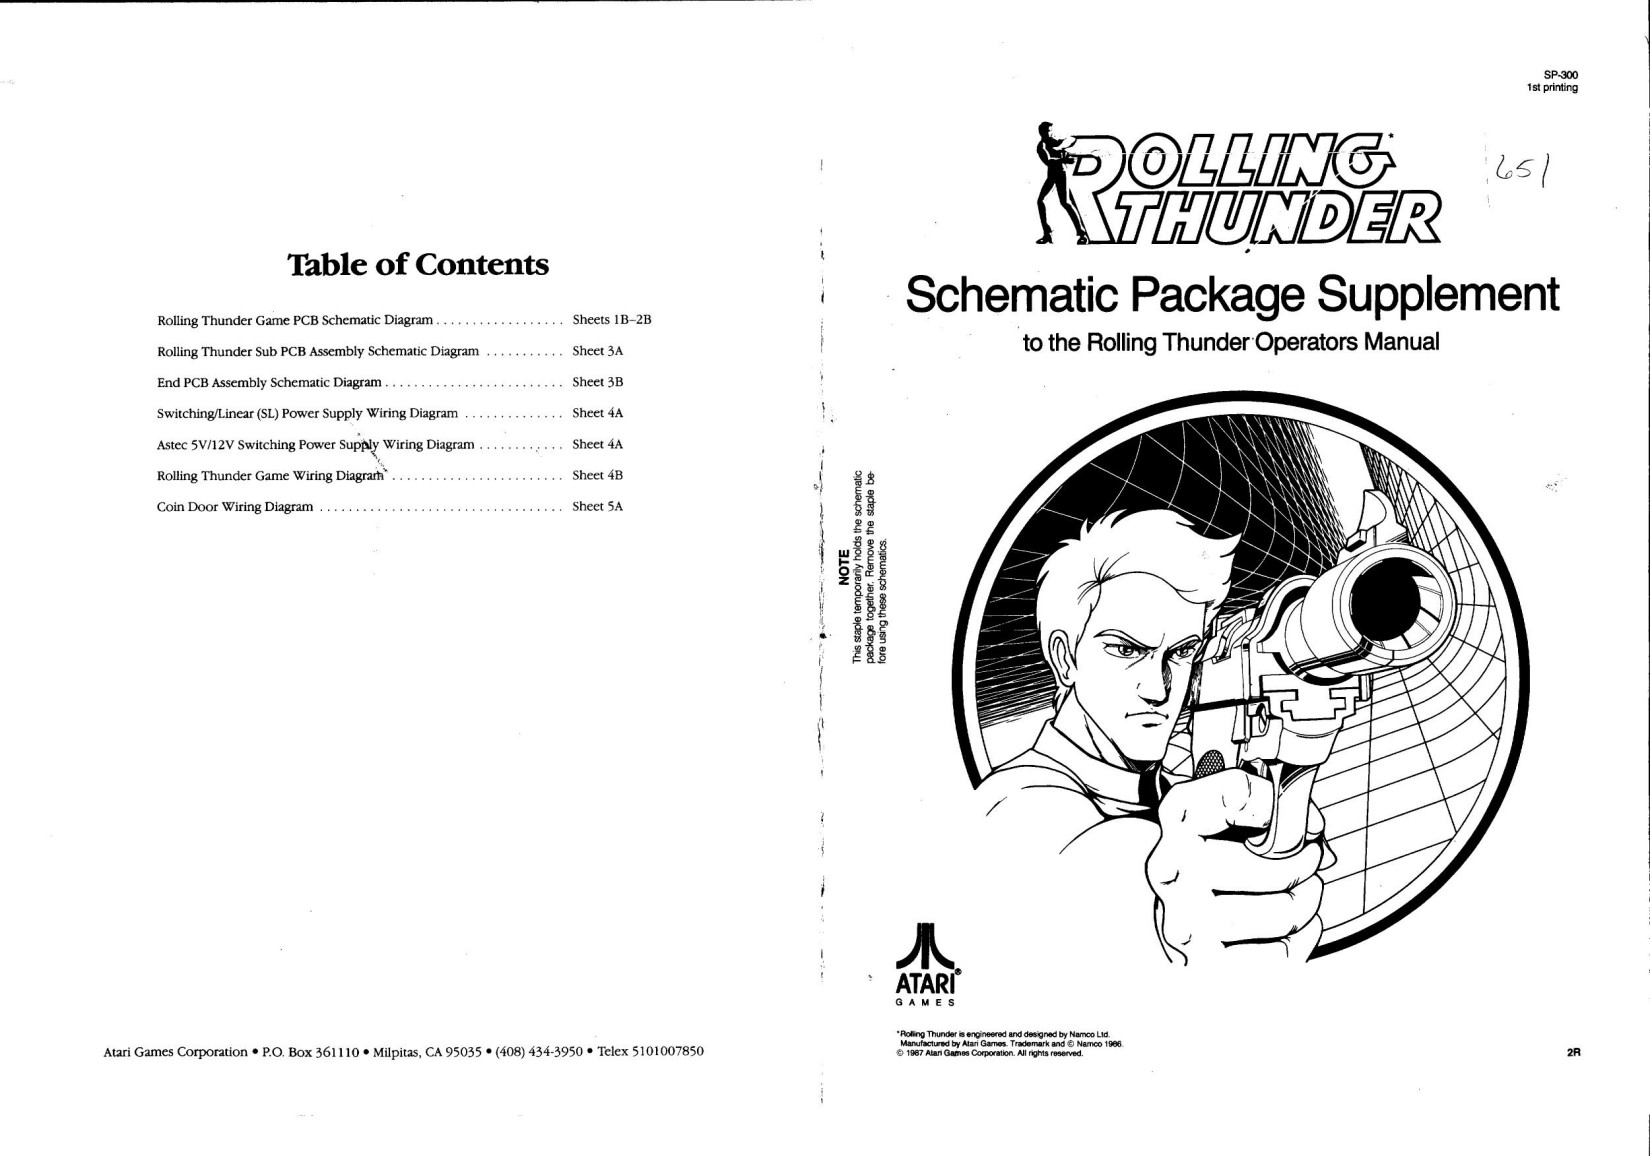 Rolling Thunder SP-300 1st Printing